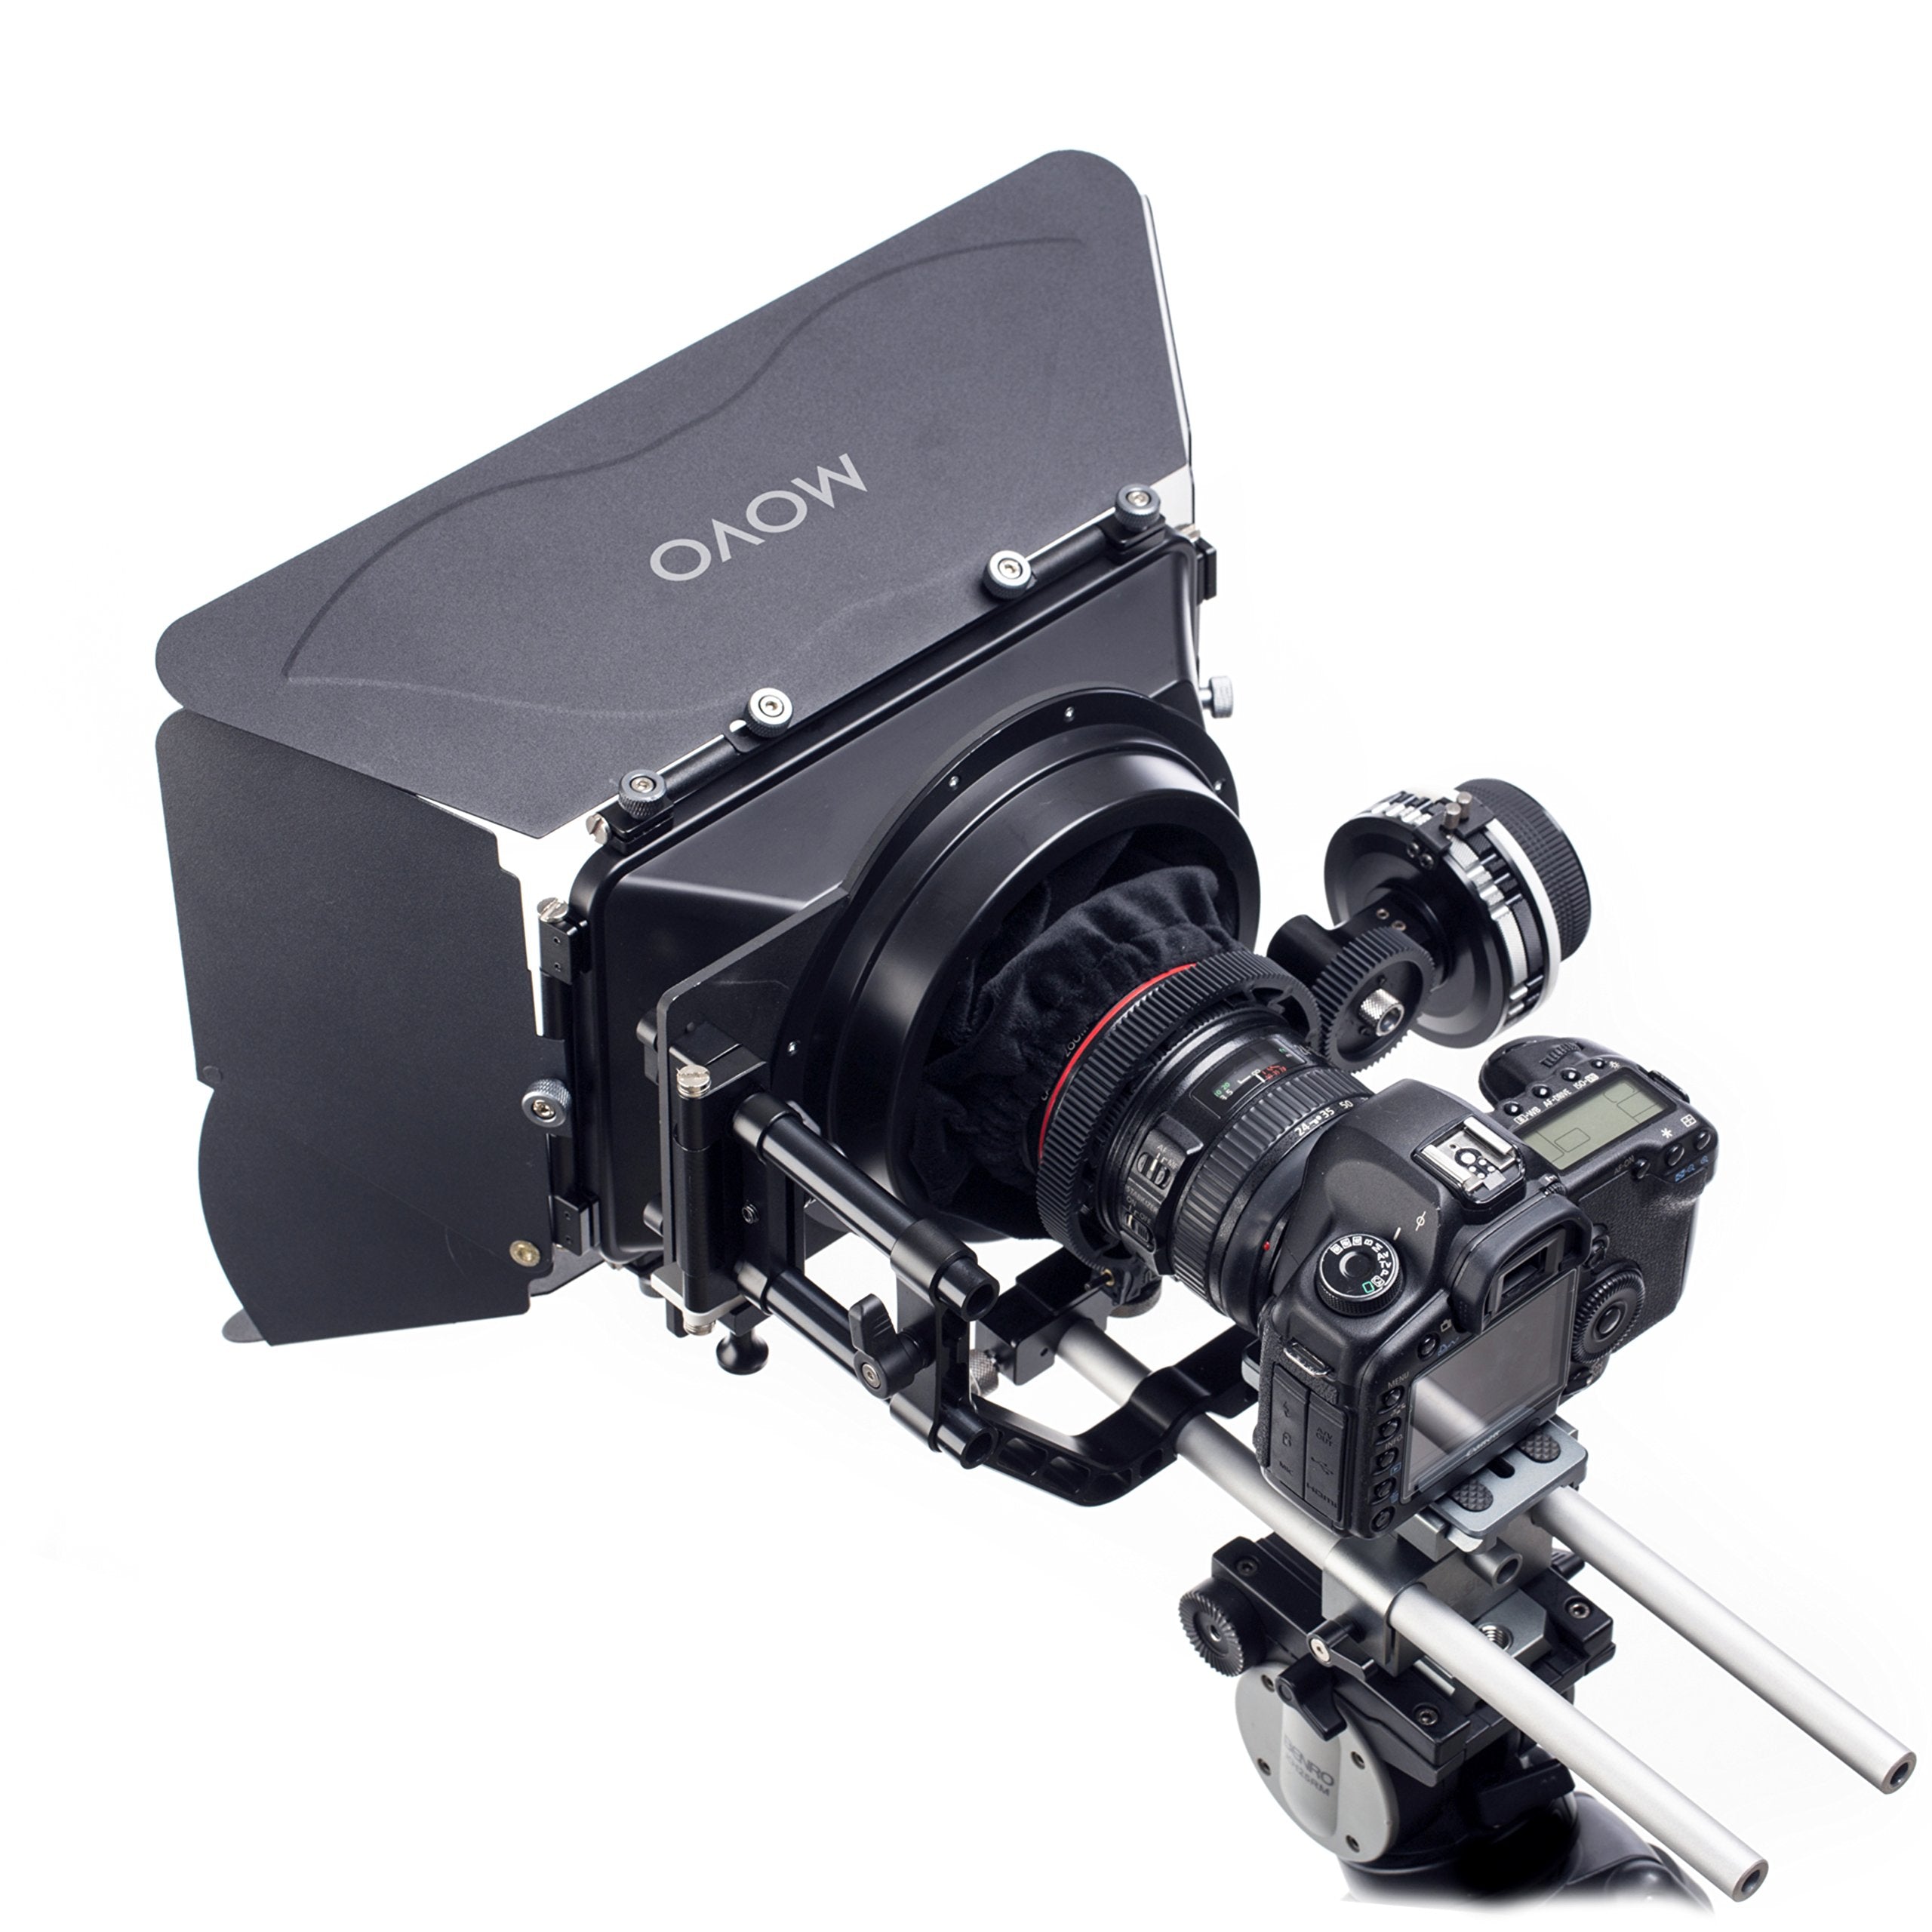 Movo/Sevenoak Professional Matte Box with Swing-Away Arm, French Flags, Side Wings and Universal Anti-Reflection Donut (for 15mm Rod System)  - Like New